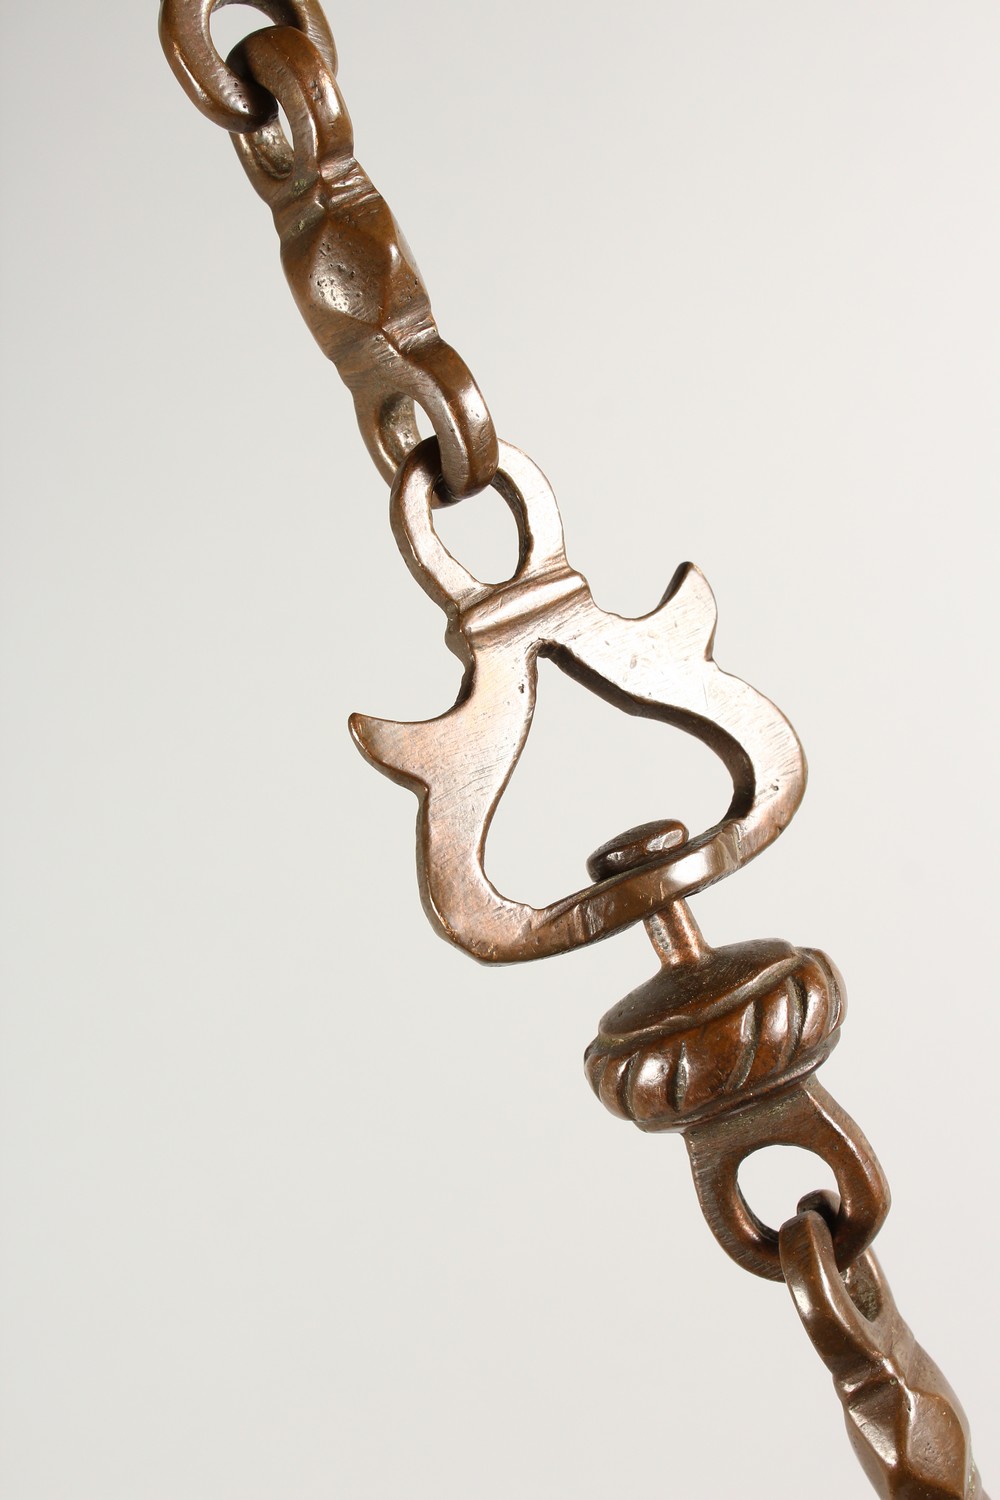 AN 18TH CENTURY JEWISH HANGING BRONZE OIL LAMP with chain. Lamp: 5.5ins high. - Image 5 of 6